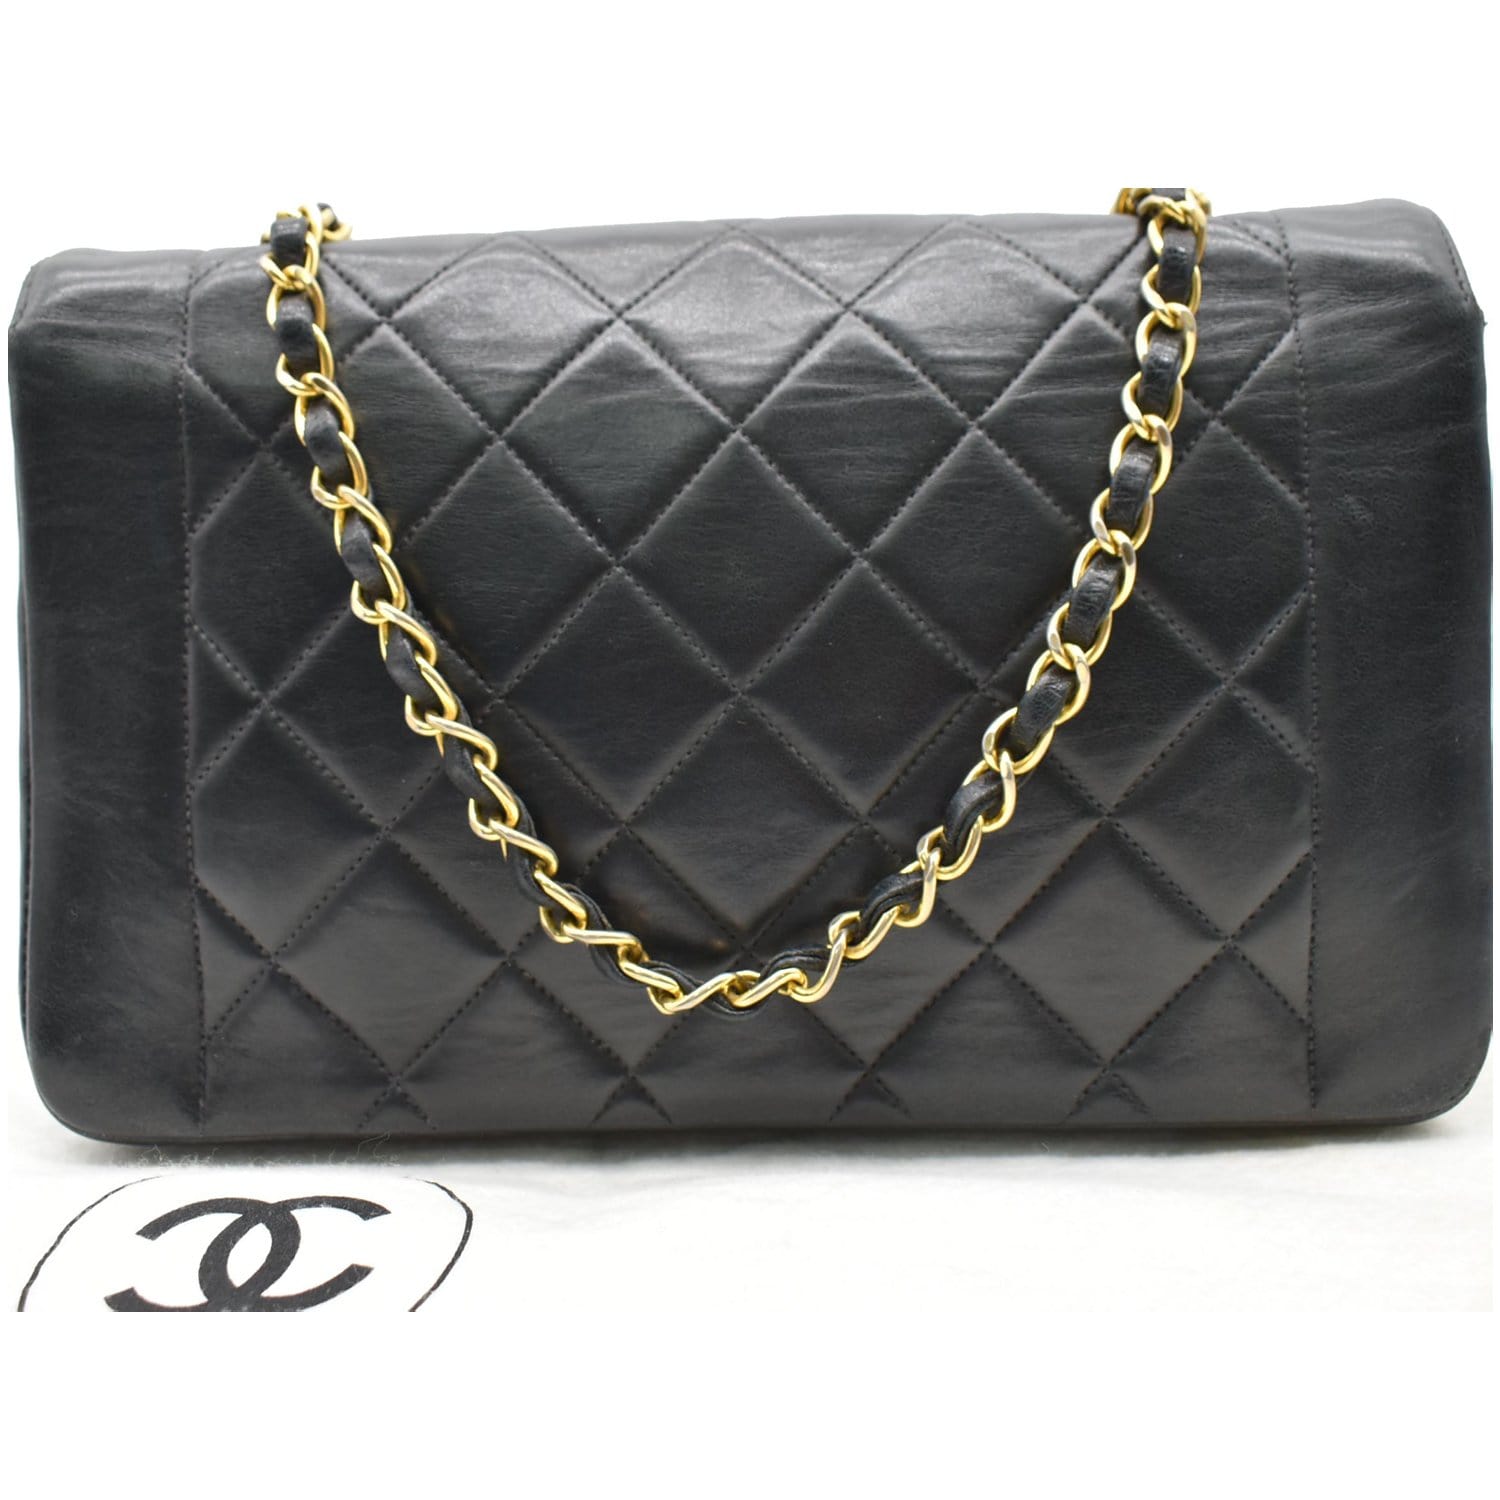 Chanel Black Lambskin Leather Quilted Medium Single Flap Diana Bag